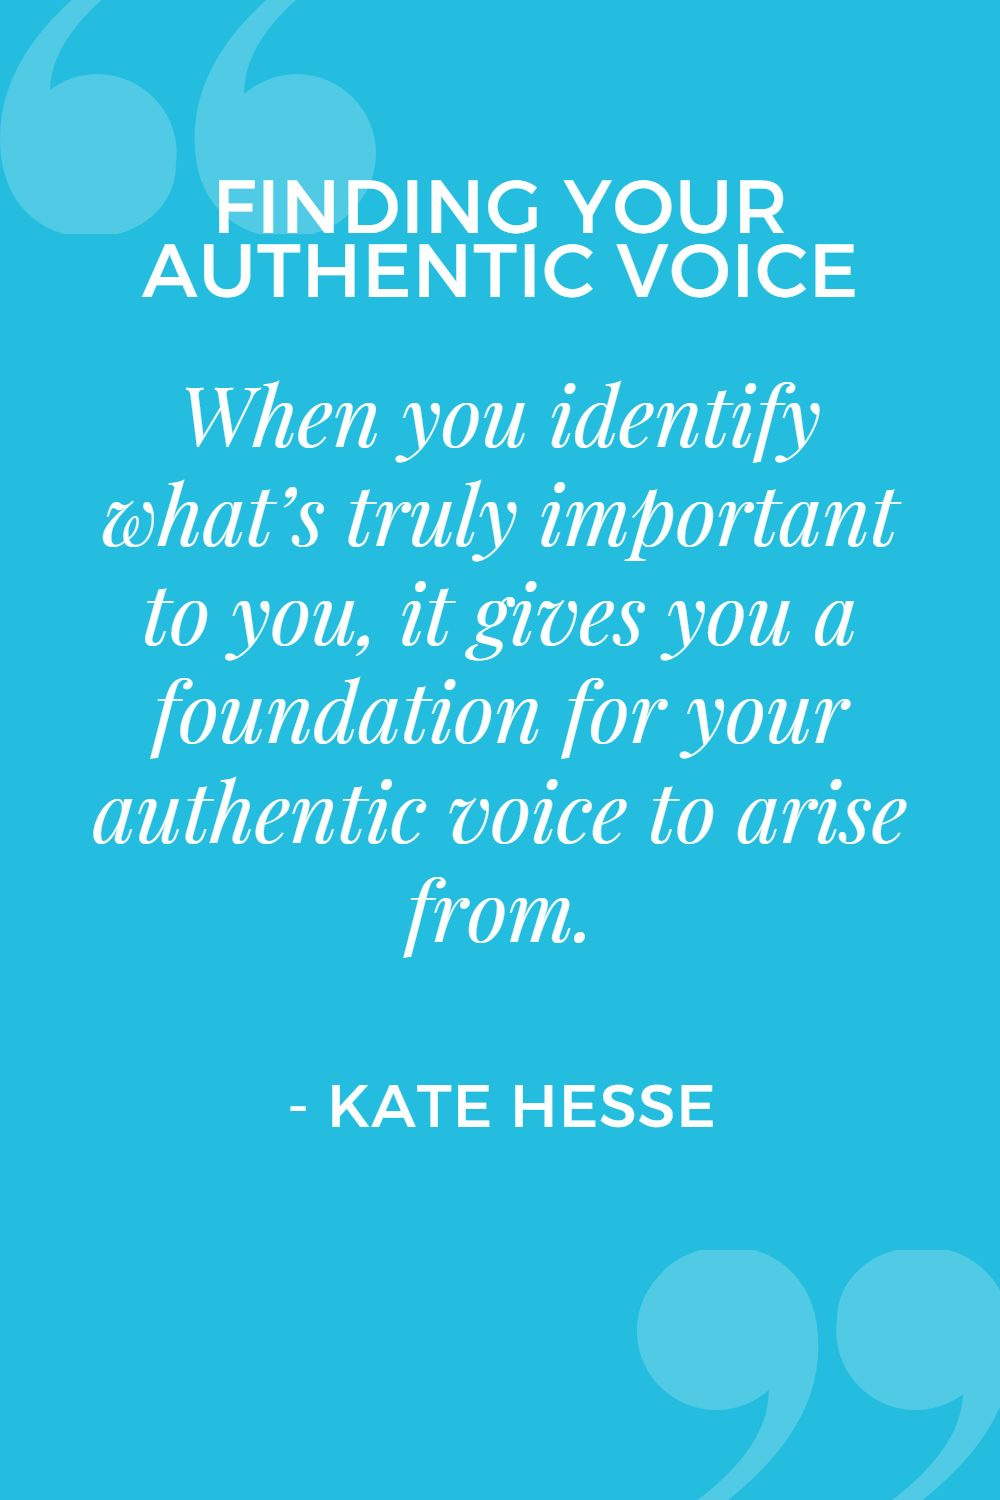 When you identify what's truly important to you, it gives you a foundation for your authentic voice to arise from.